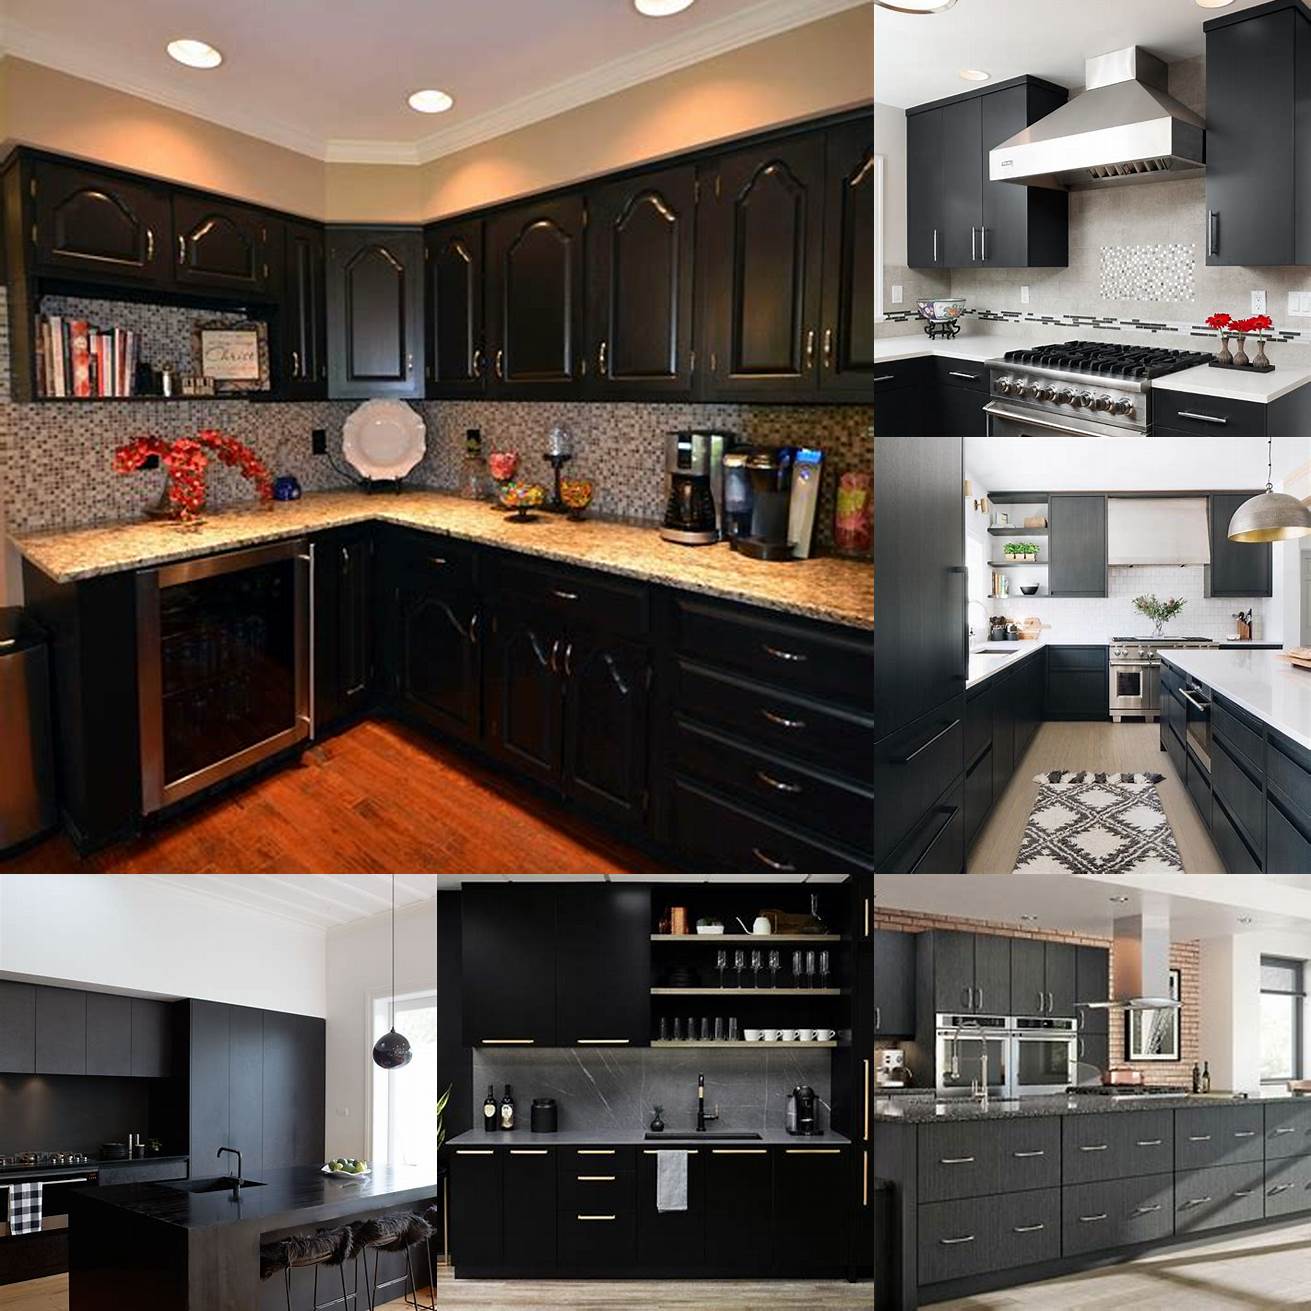 Image of a kitchen with black flat panel cabinets